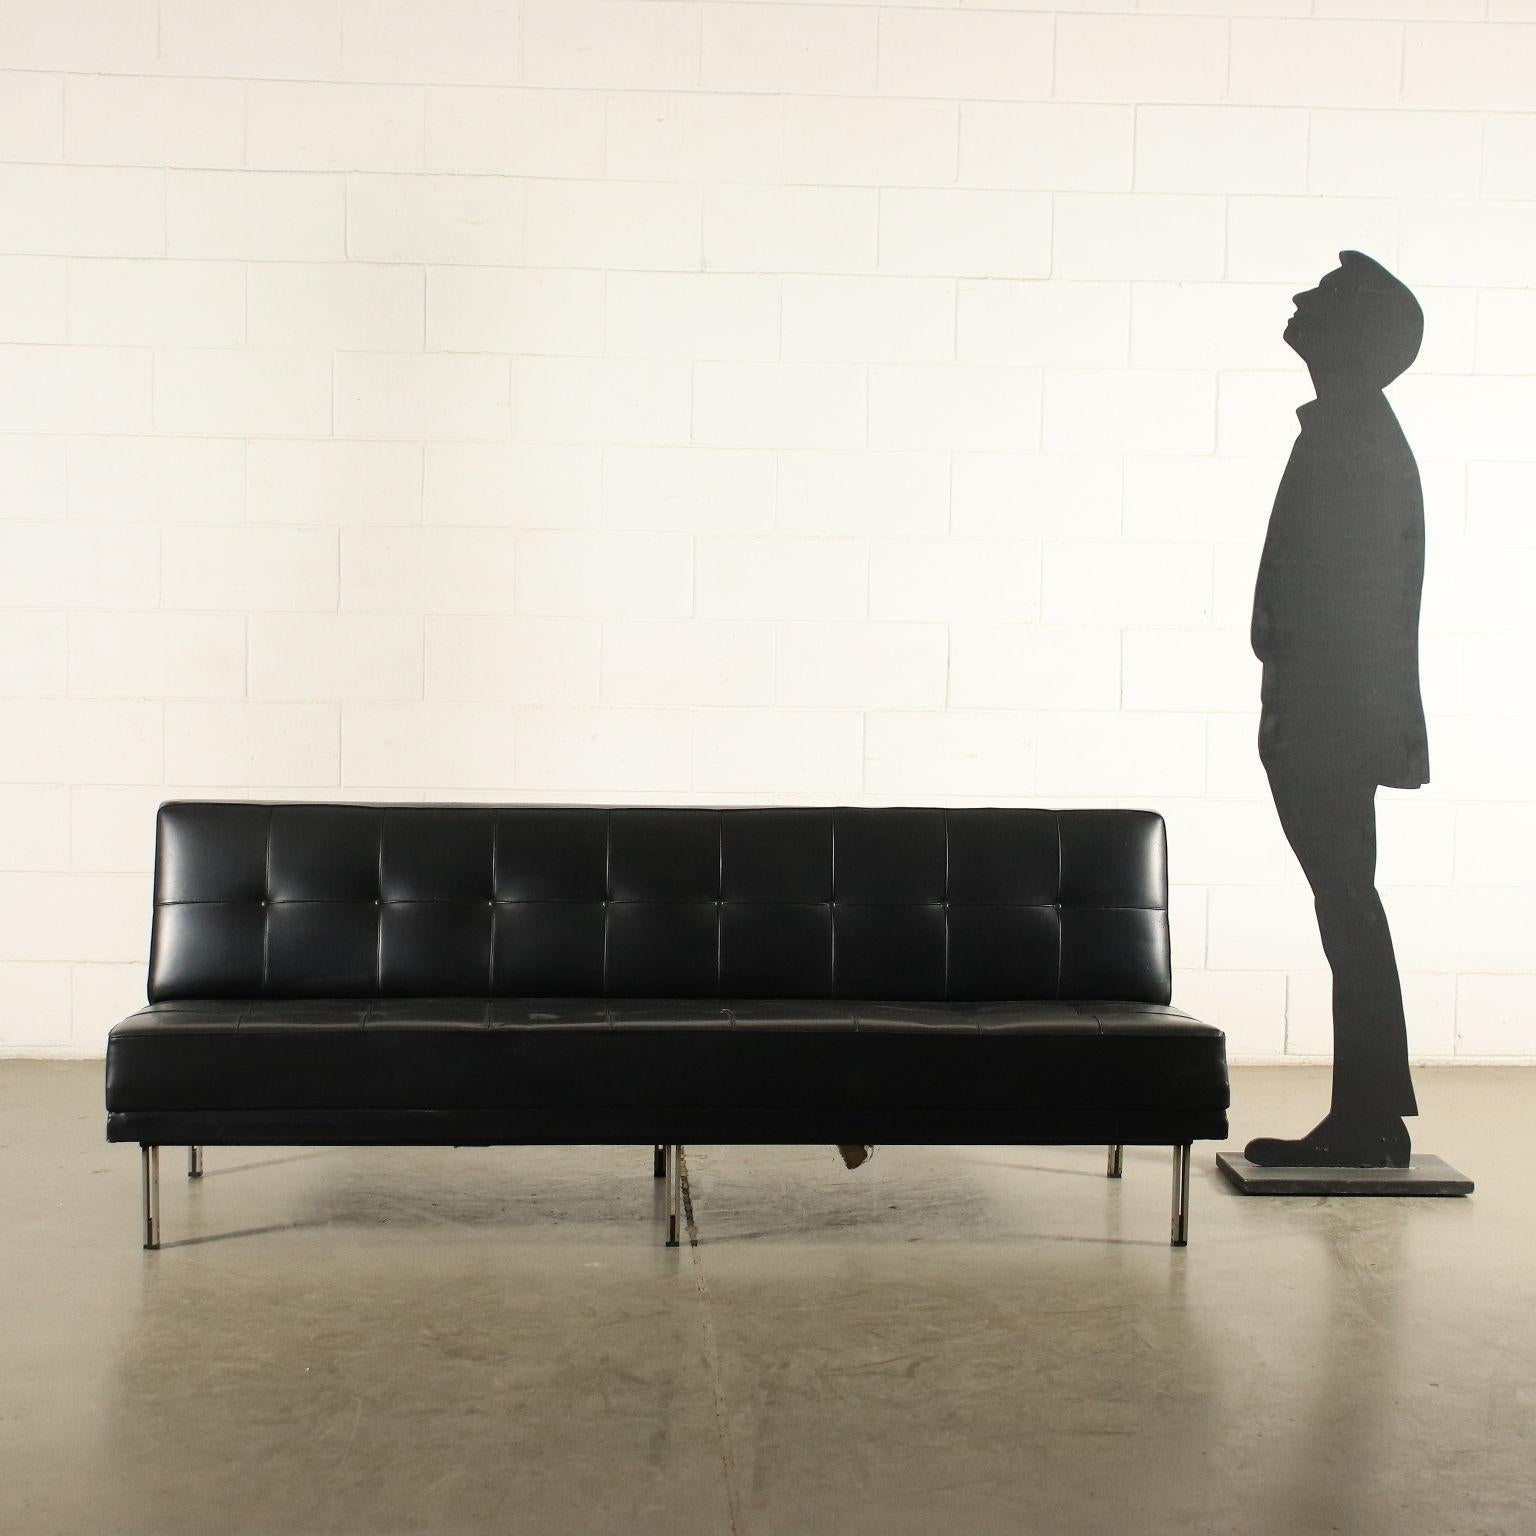 Sofa, foam padding, original leatherette upholstery from the time, chromed metal legs.